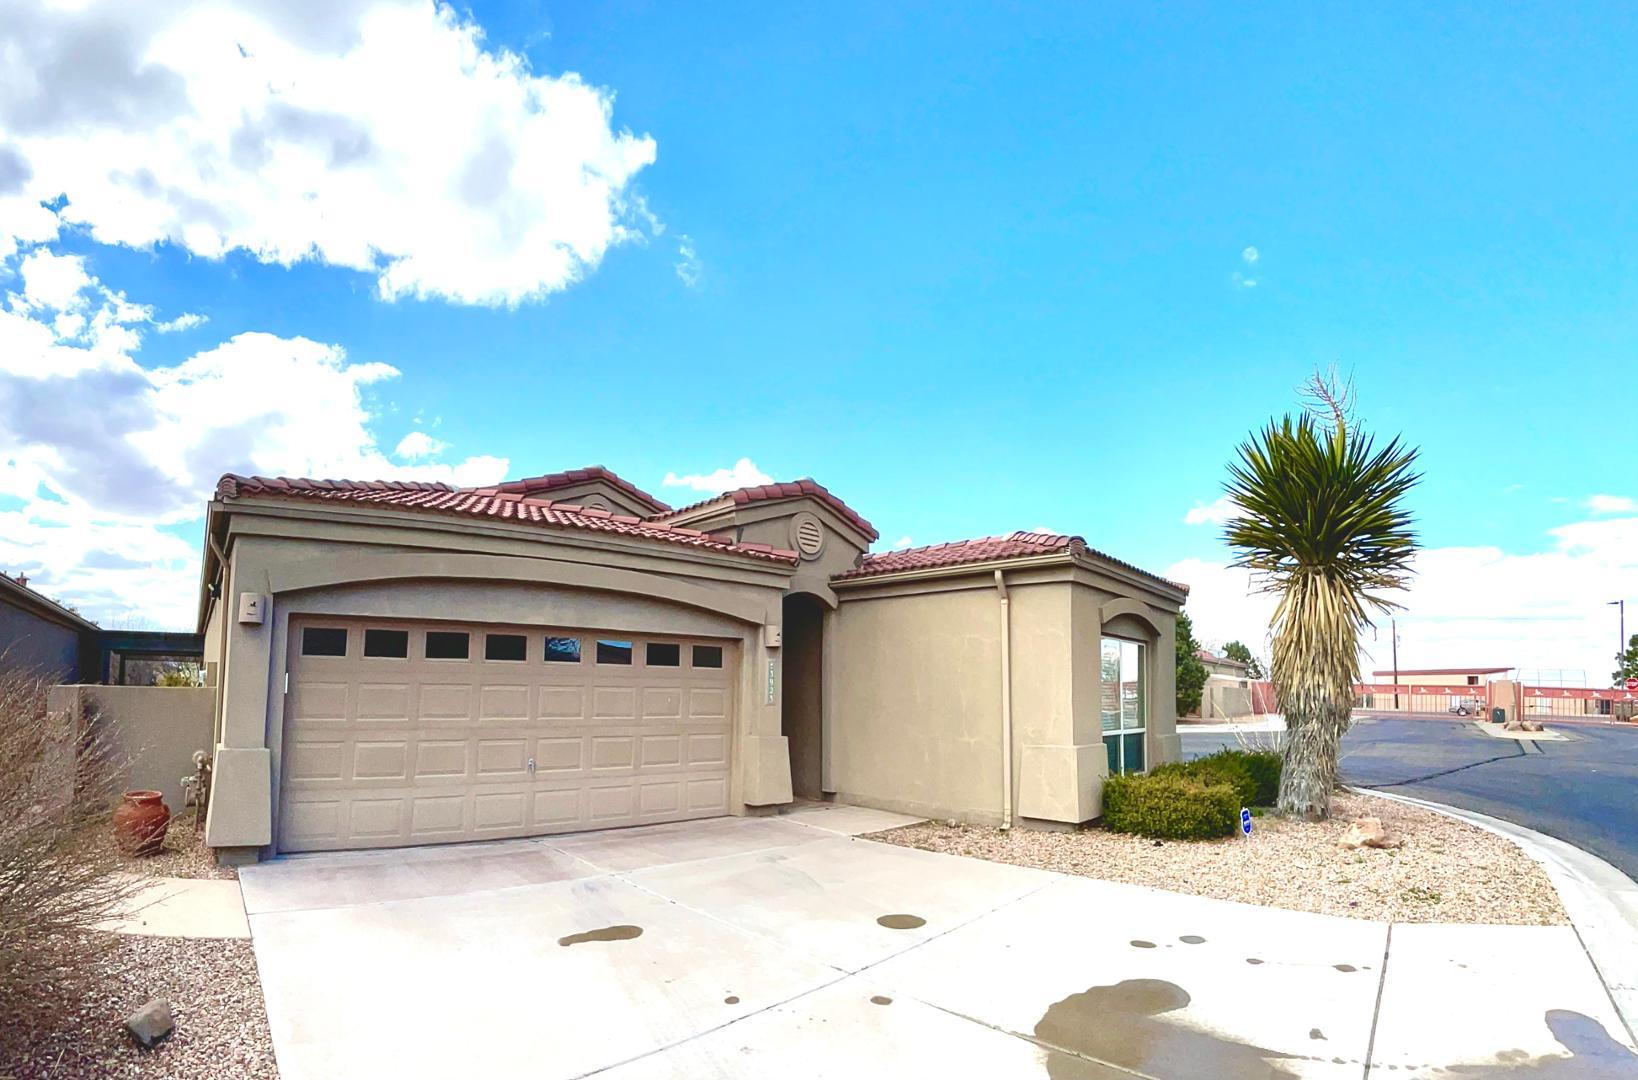 3923 Fox Sparrow Trail NW, Albuquerque, New Mexico 87120, 3 Bedrooms Bedrooms, ,3 BathroomsBathrooms,Residential Lease,For Rent,3923 Fox Sparrow Trail NW,1059704